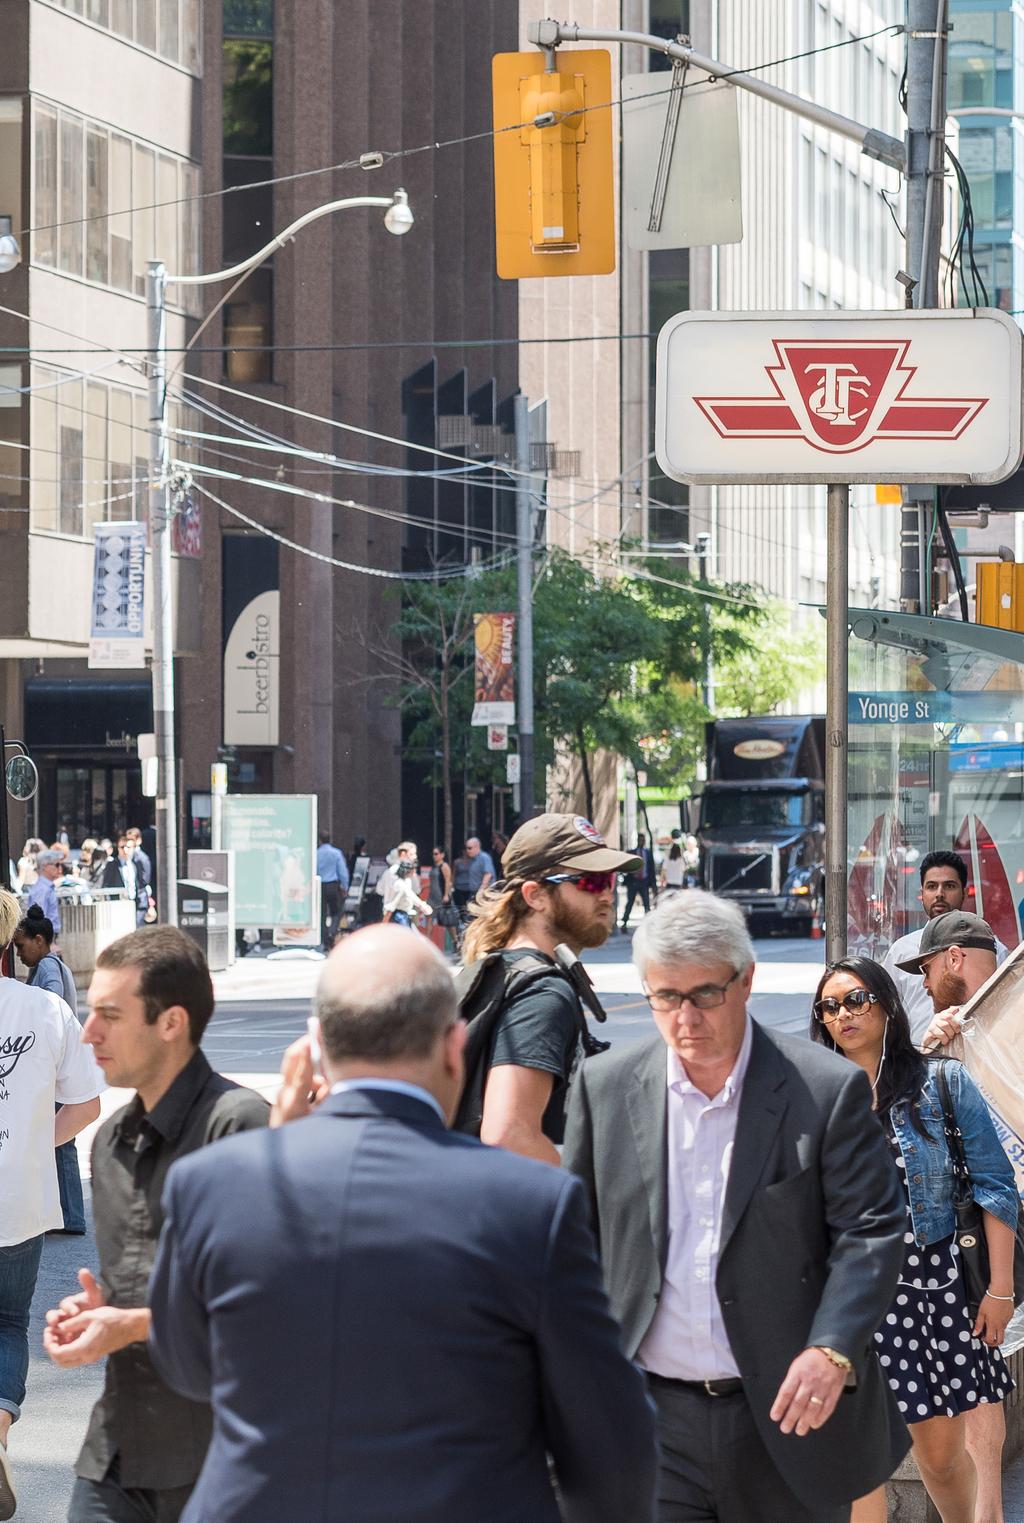 25 years from now The population of Toronto will have increased by more than a million people. The downtown core will be twice as crowded. Our city will be even more culturally diverse.